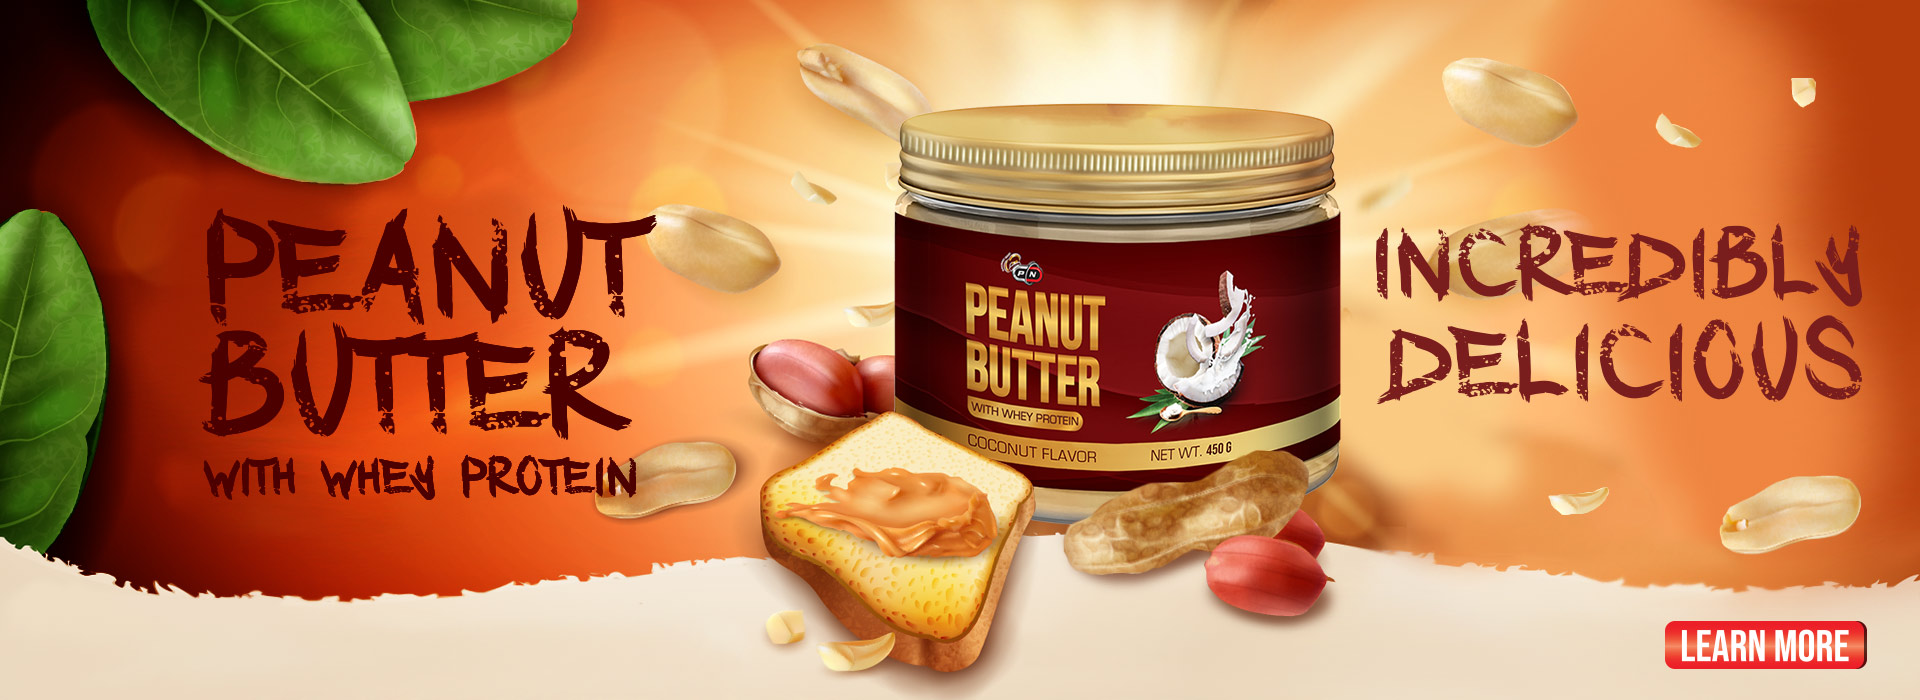 PEANUT BUTTER WITH WHEY PROTEIN